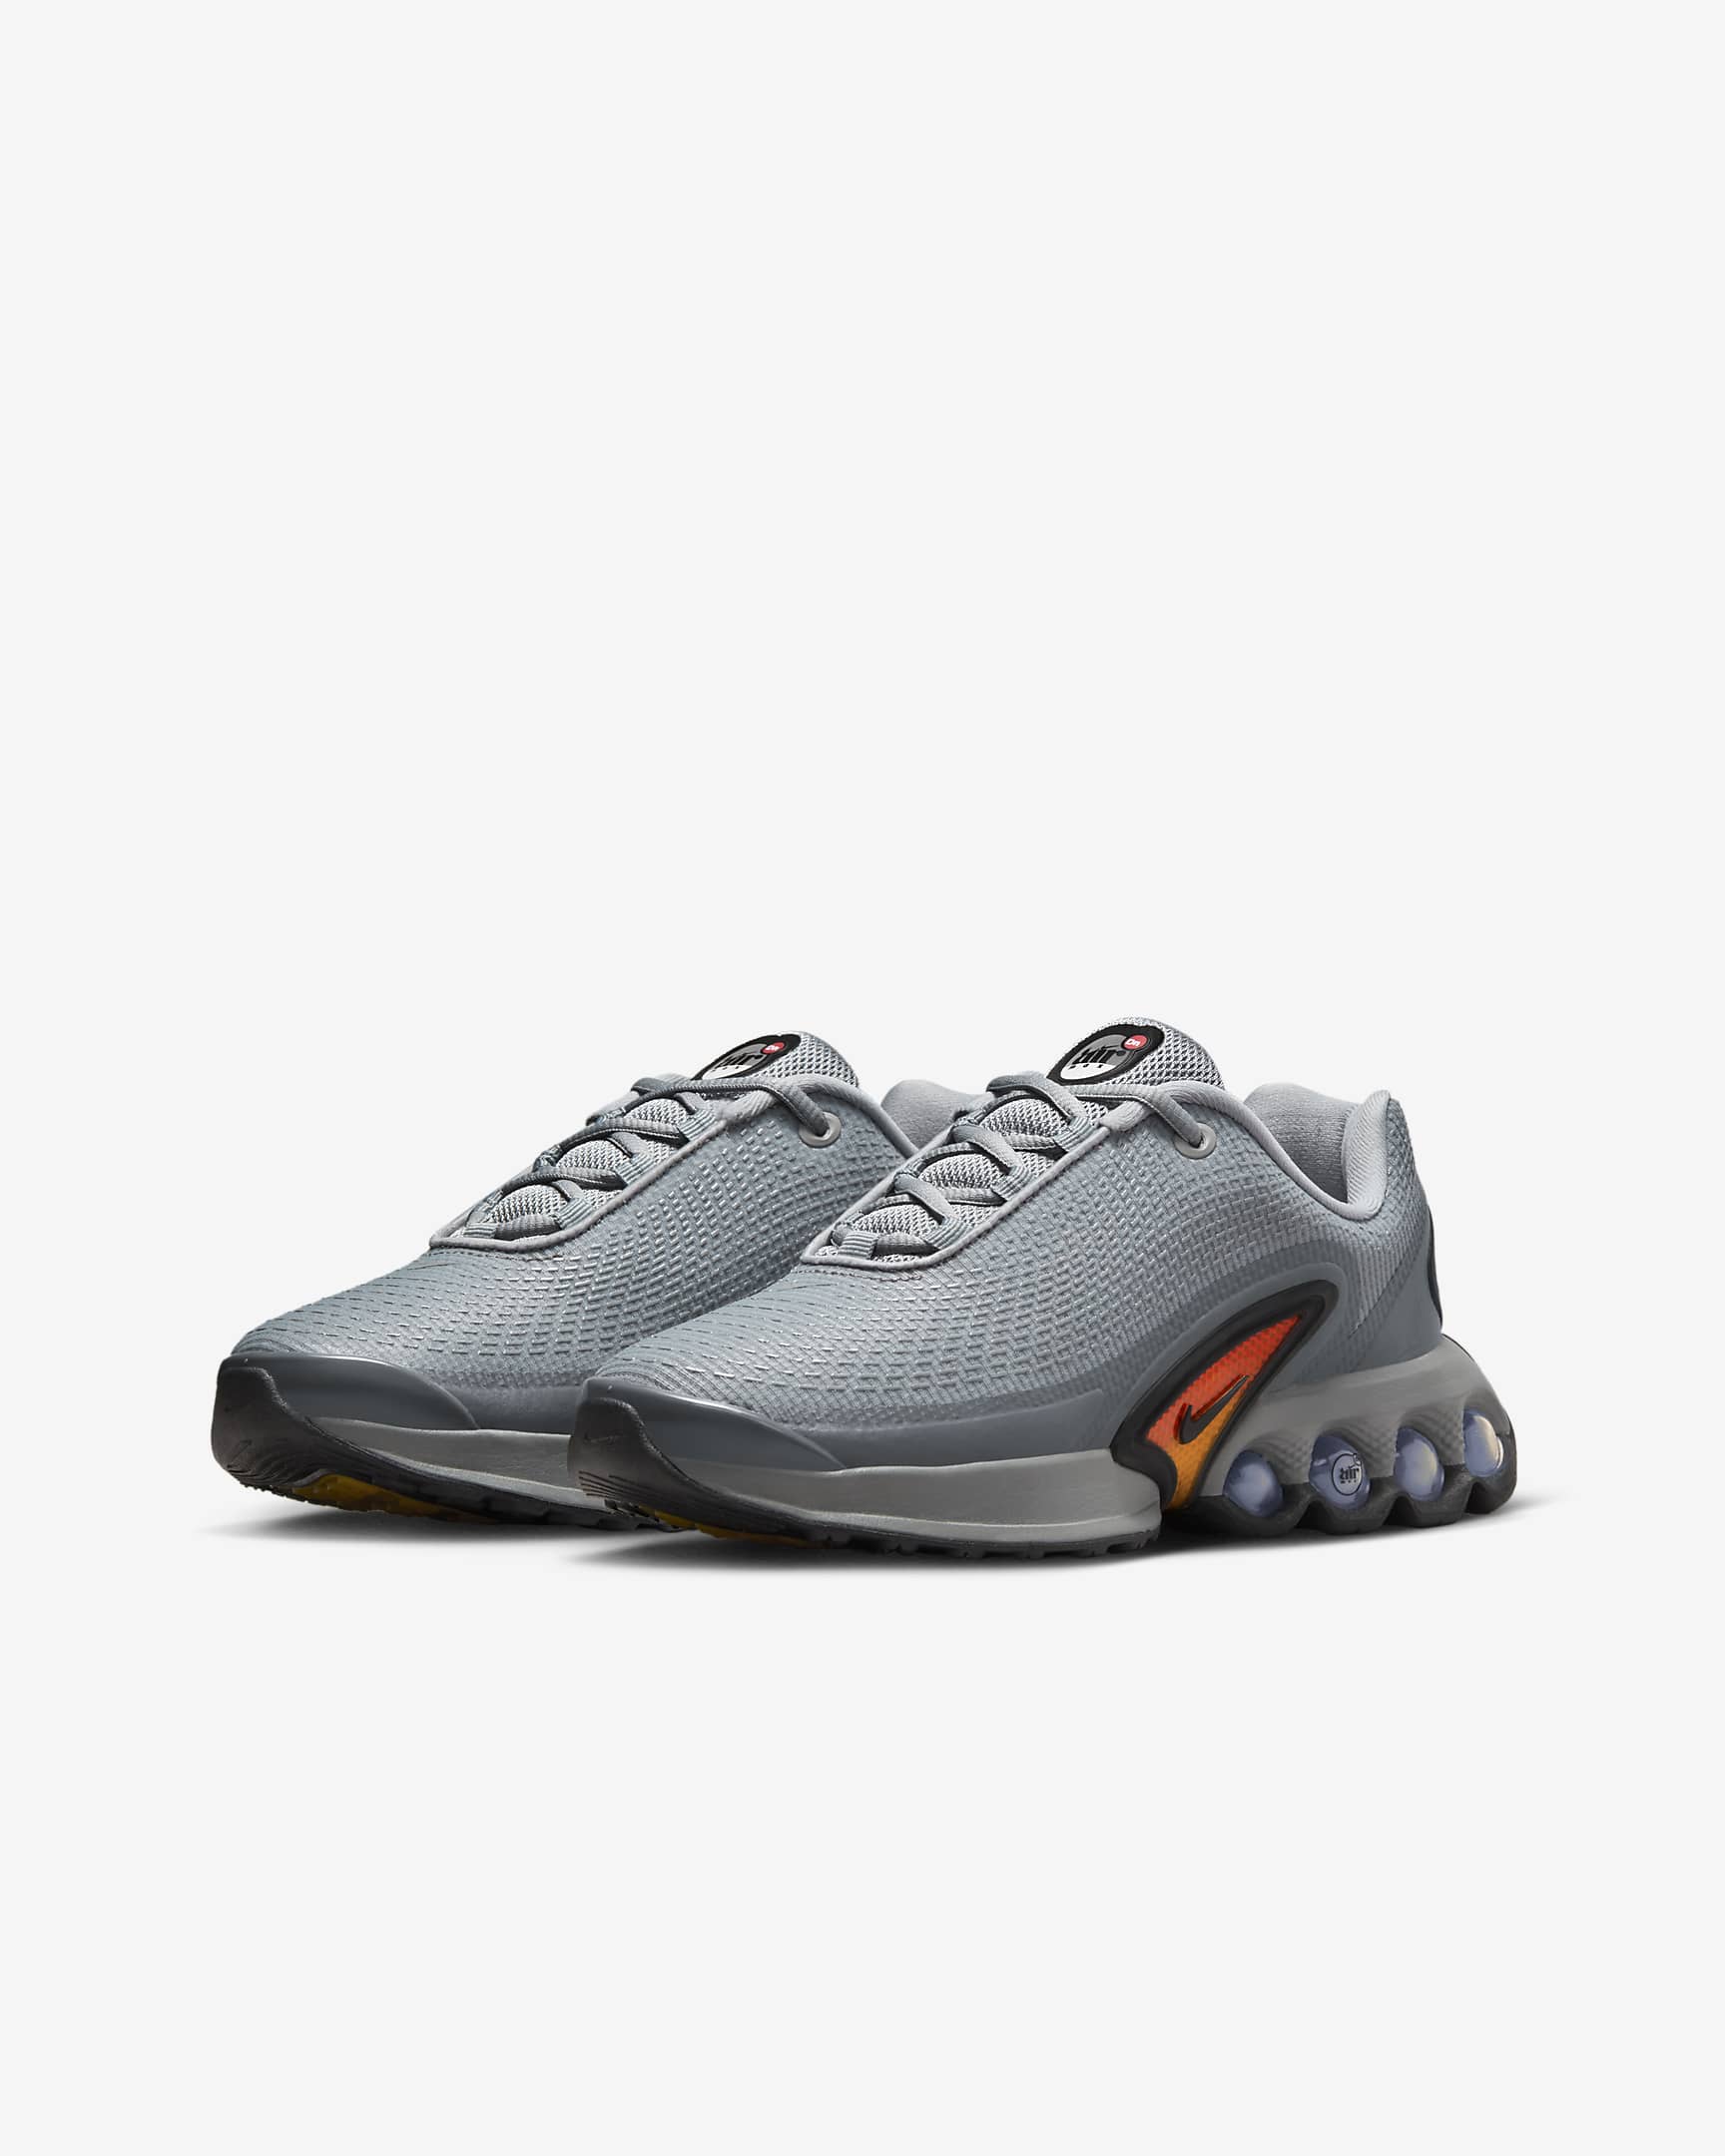 Chaussure Nike Air Max Dn pour ado - Particle Grey/Smoke Grey/Wolf Grey/Noir